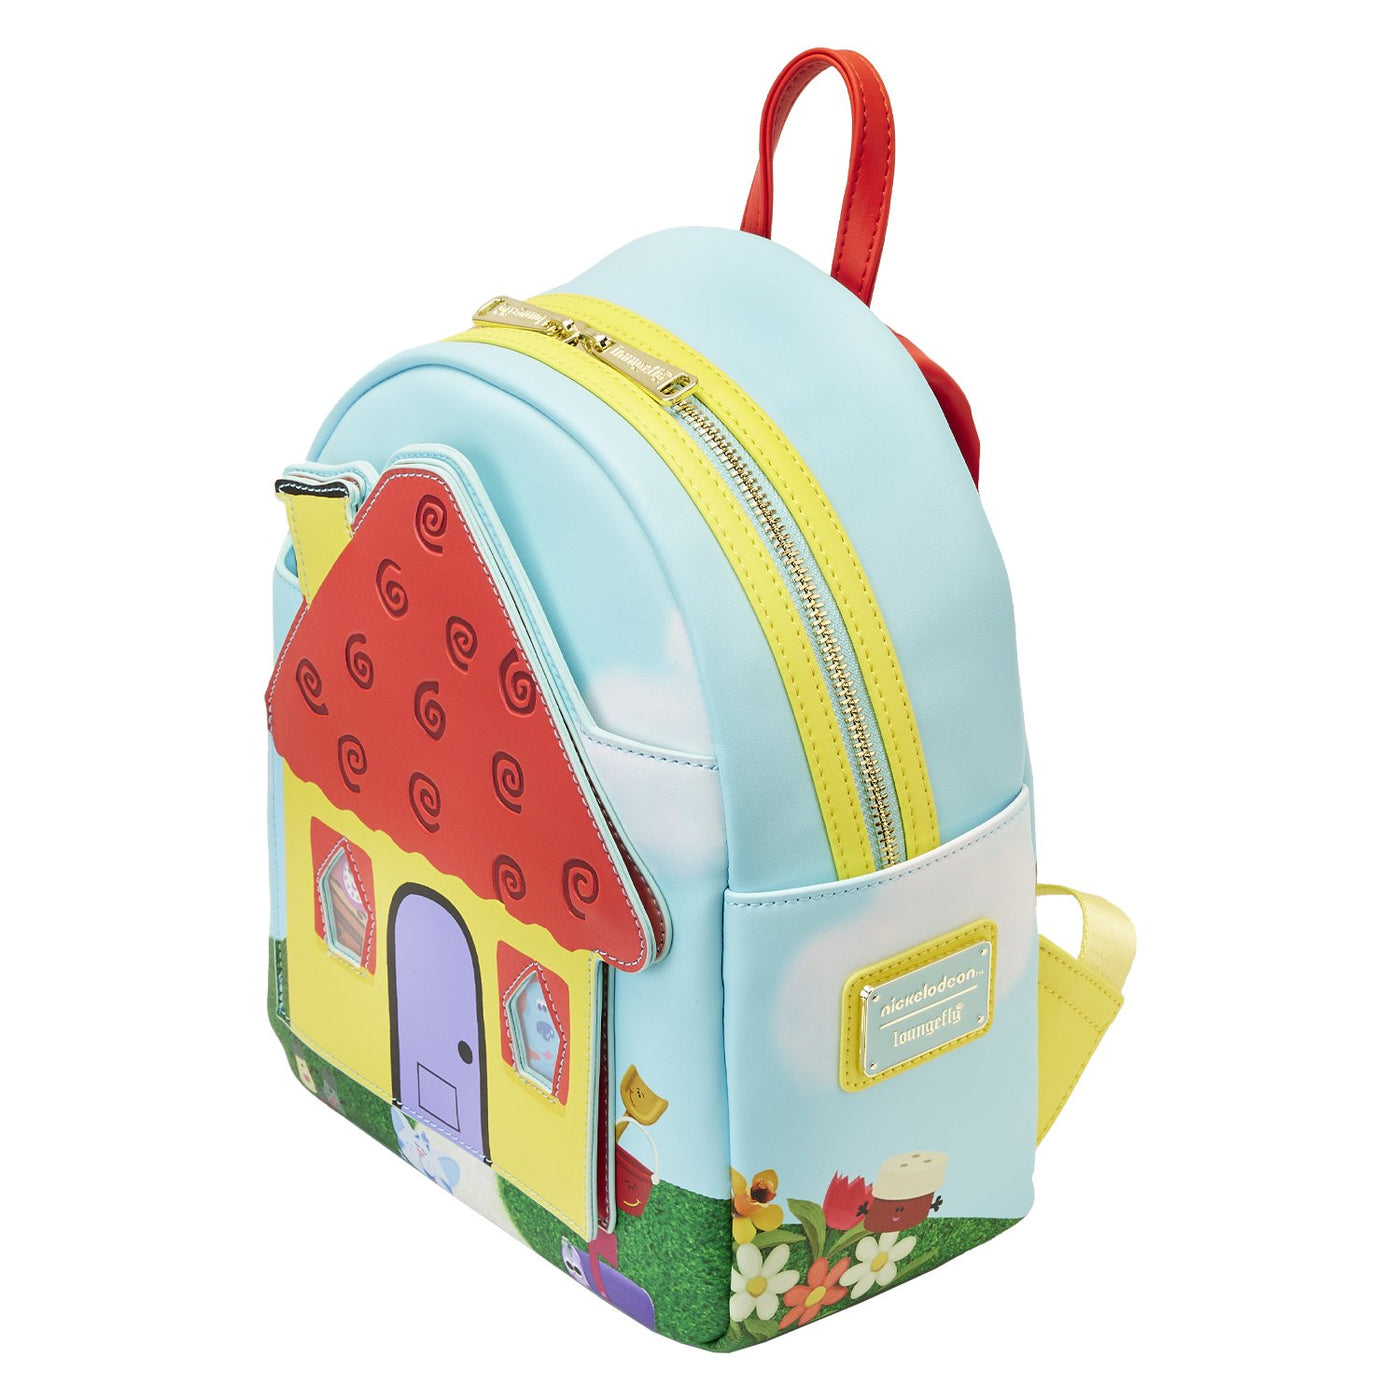 671803451001 - Loungefly Nickelodeon Blues Clues Open House Mini Backpack - Top View